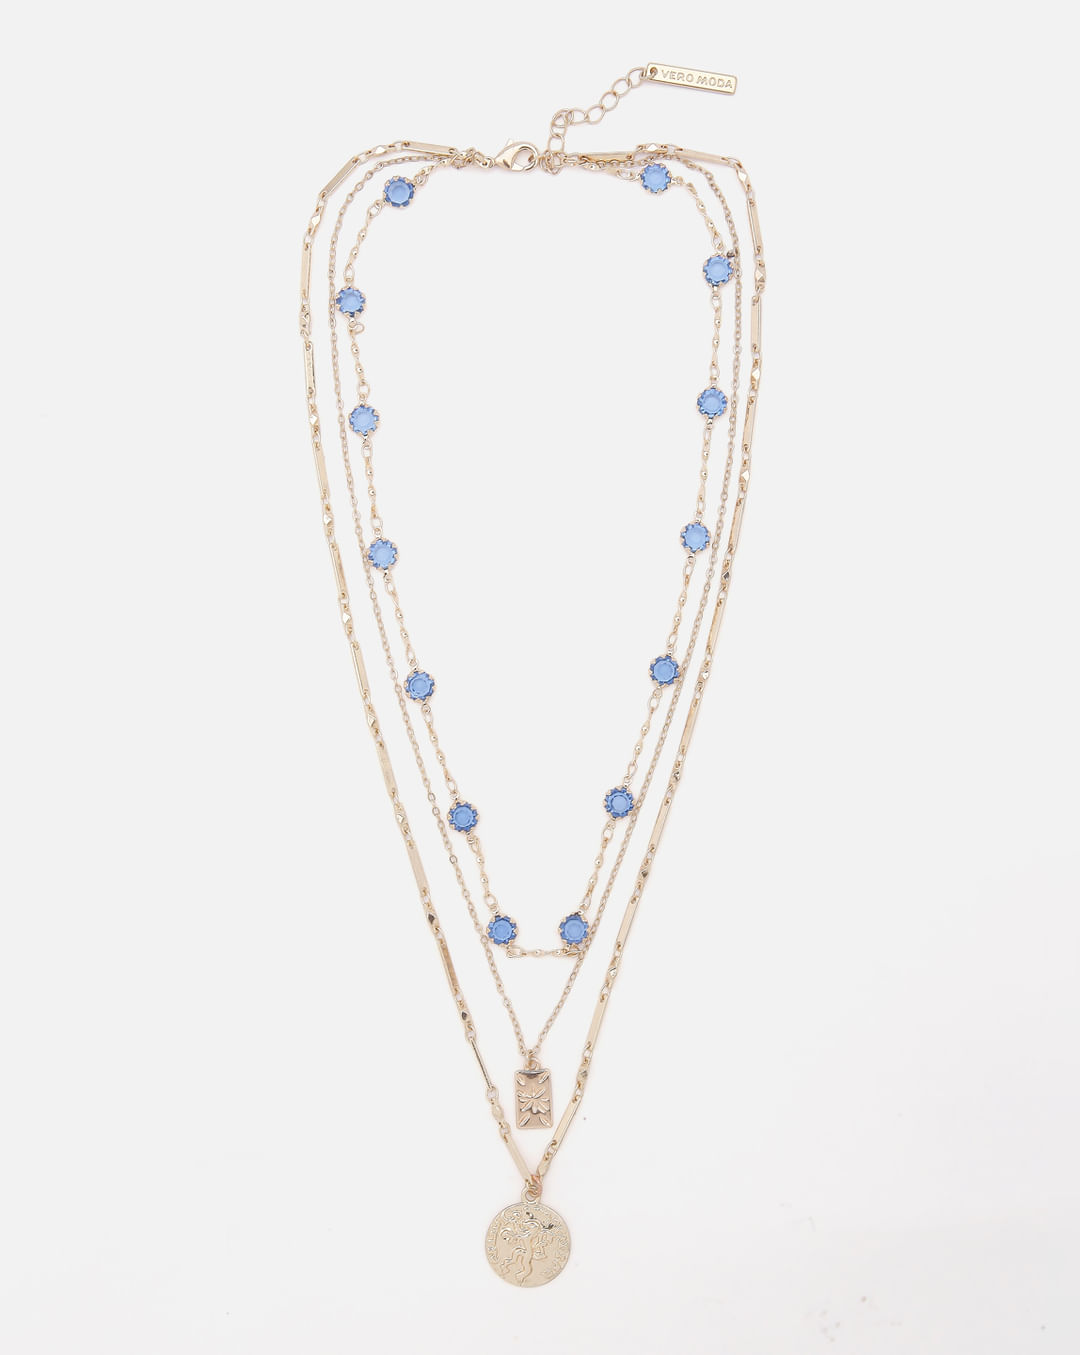 Women's Jewellery - Golden Studded Layered Necklace Online in India